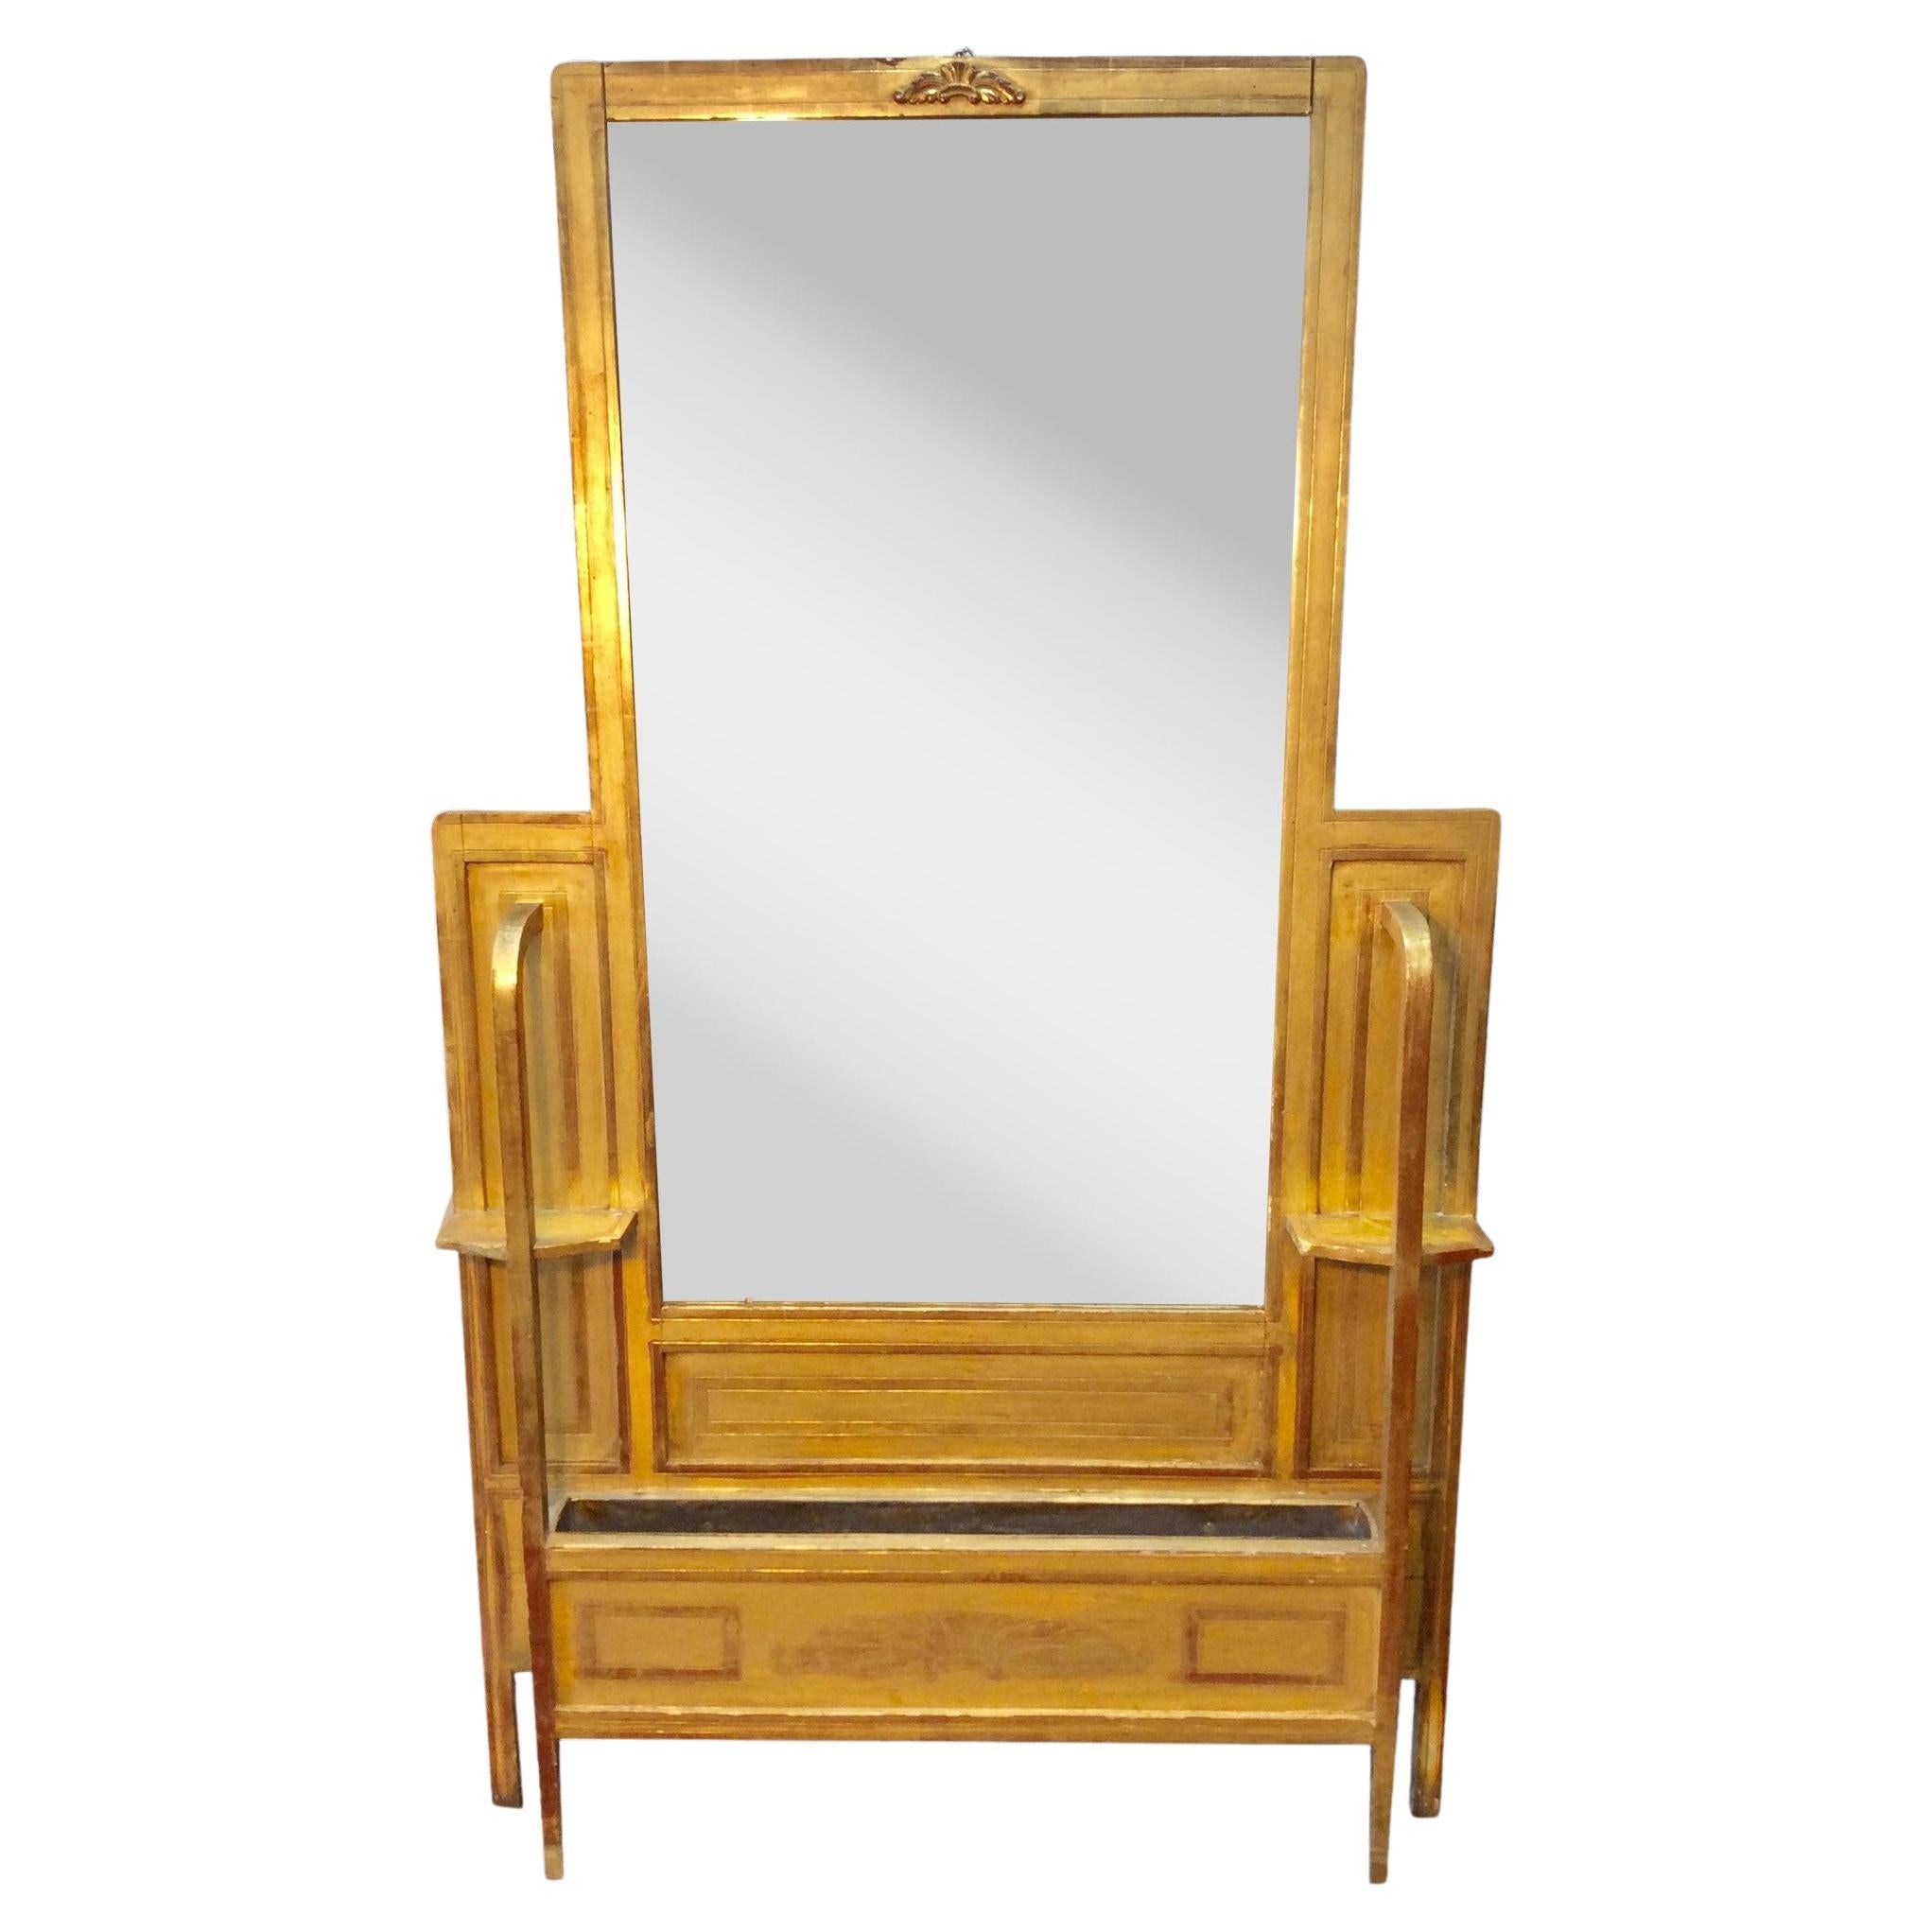 Early 1900s French Art Deco Gold Gilt Hall Mirror Jardinere